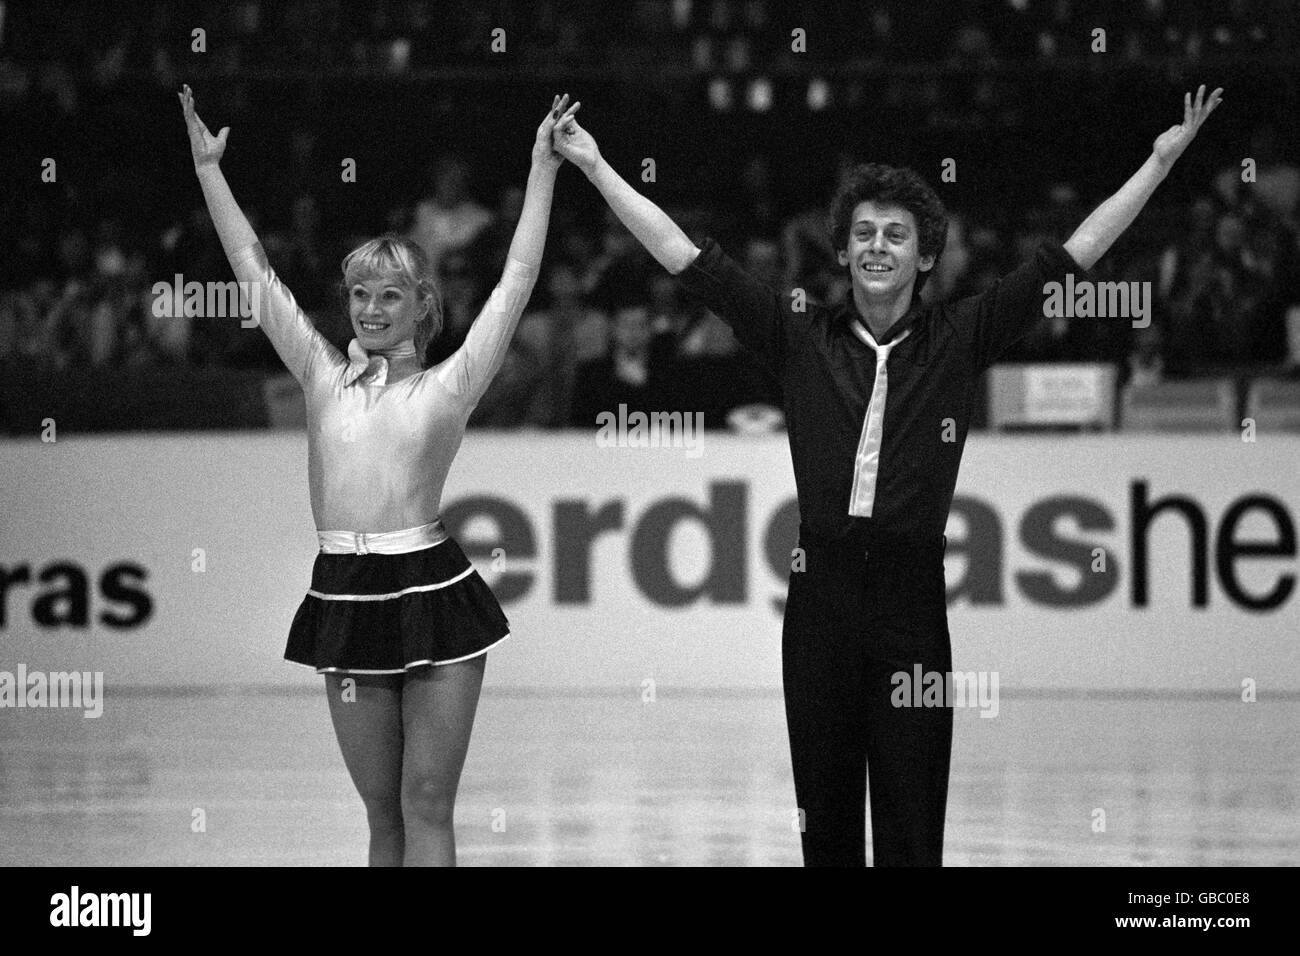 Britain's Nicky Slater and Karen Barber, principal bearers of the flag in the absence of World Champions Jayne Torvill and Christopher Dean, lying in second place in the European Ice Dance Championships. Stock Photo